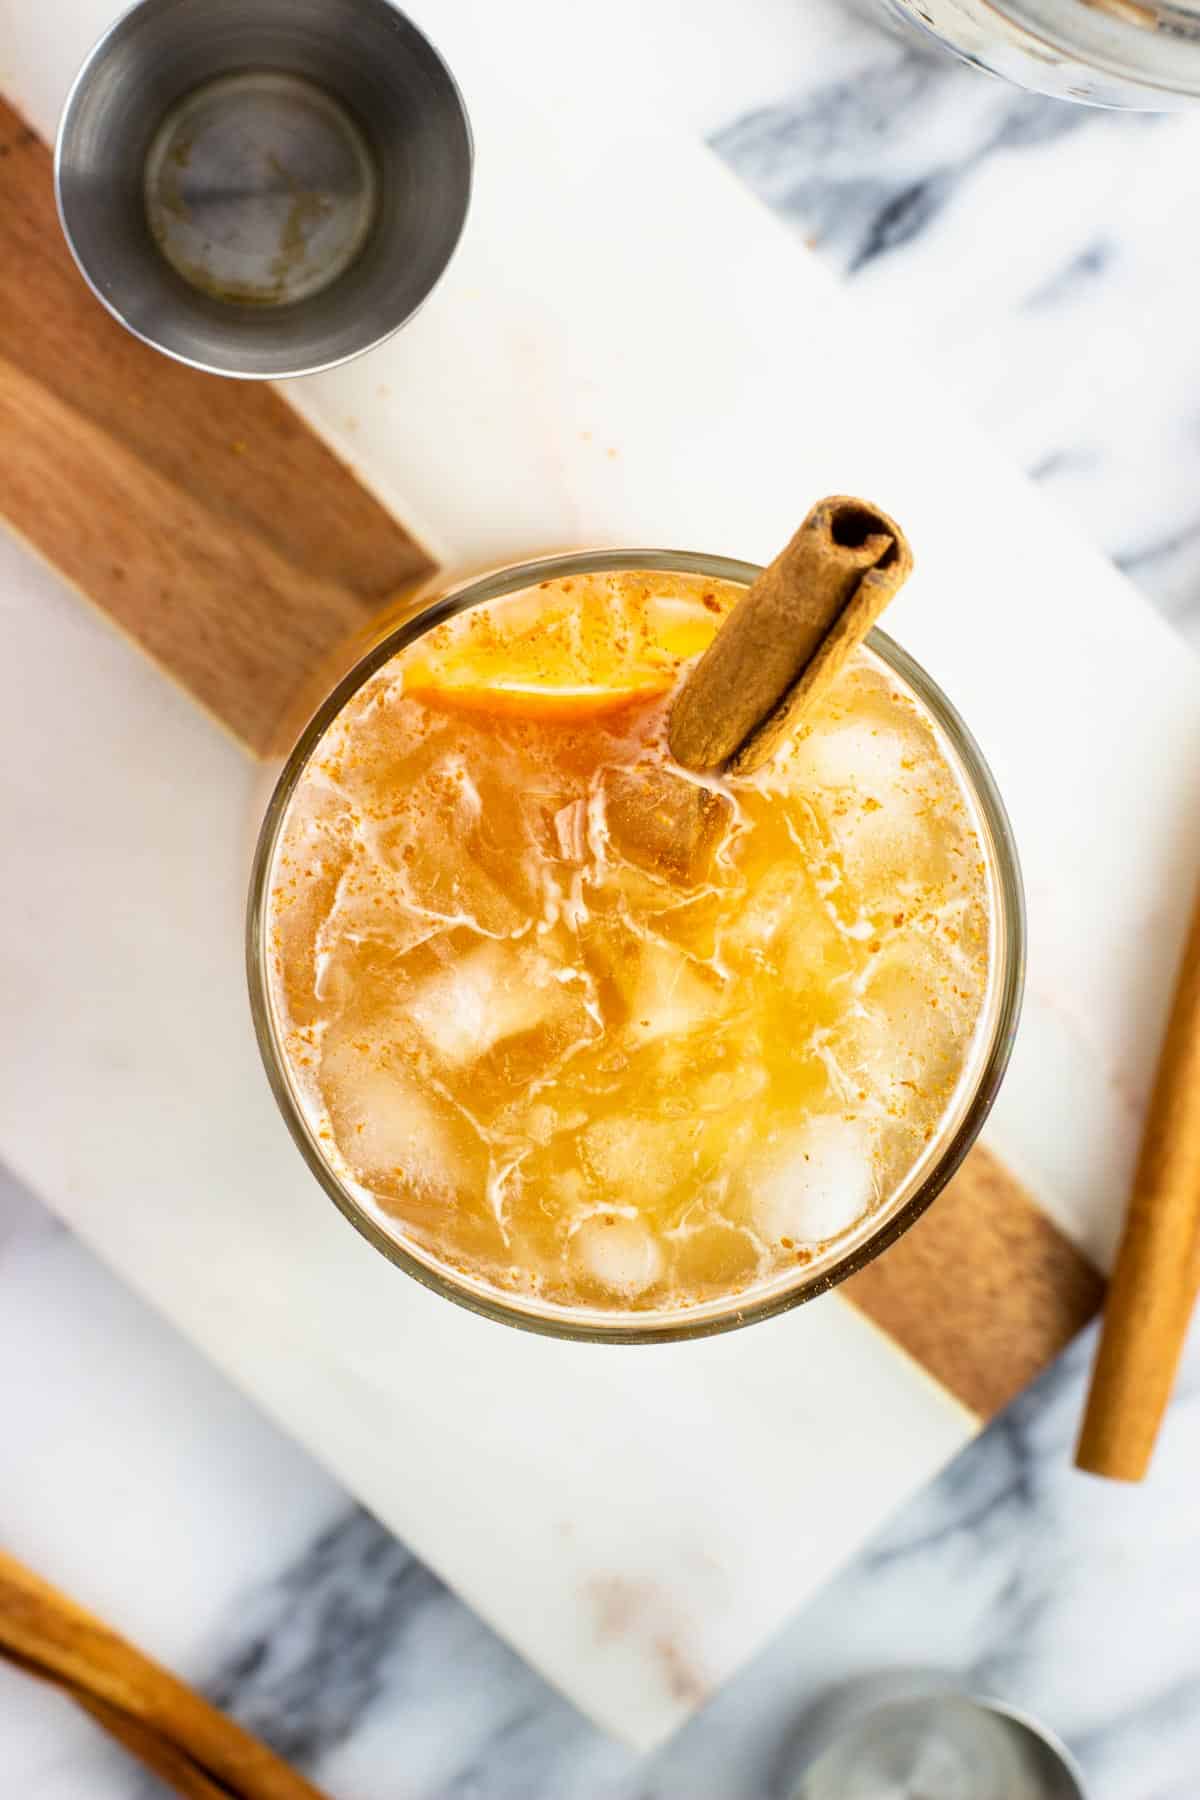 A top view of a cinnamon stick and orange peel in a cocktail.